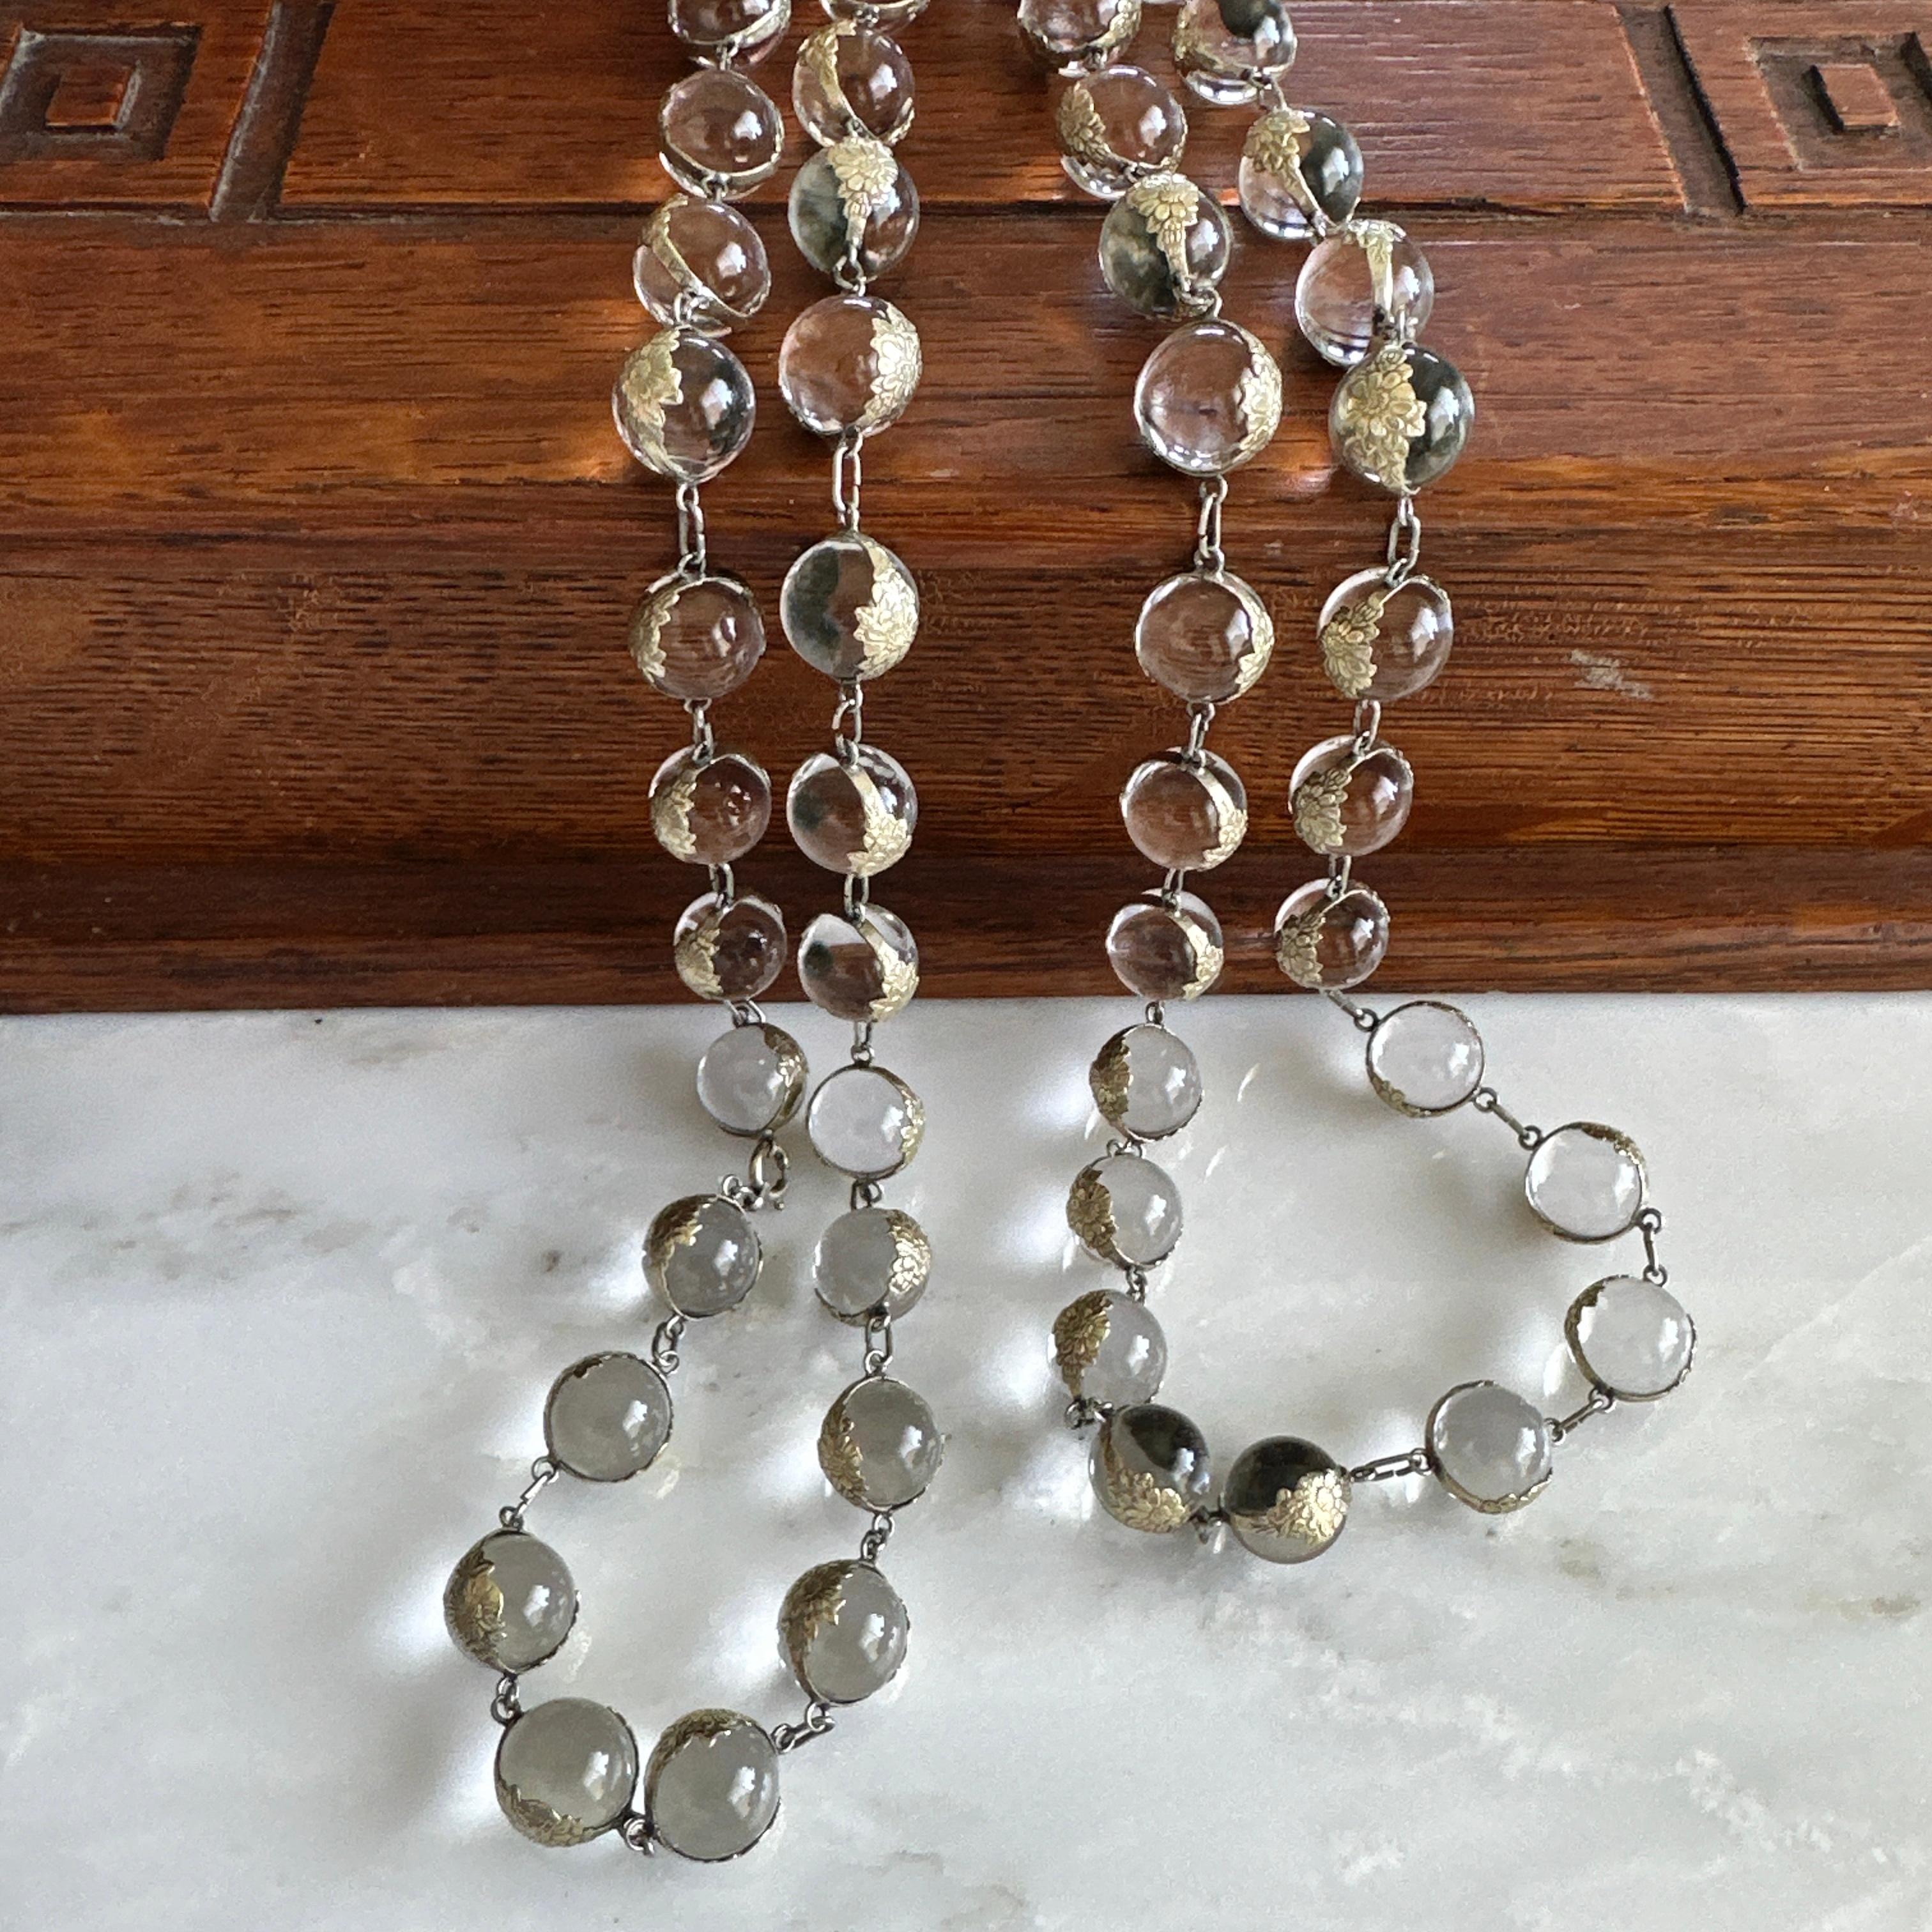 Details:
Fabulous Art Deco Pools of Light necklace in sterling silver. Necklace is in wonderful condition, and is 45 inches in length, with a clasp which makes it easy to wrap this two times around your neck! The 53 clear orbs making up the balls